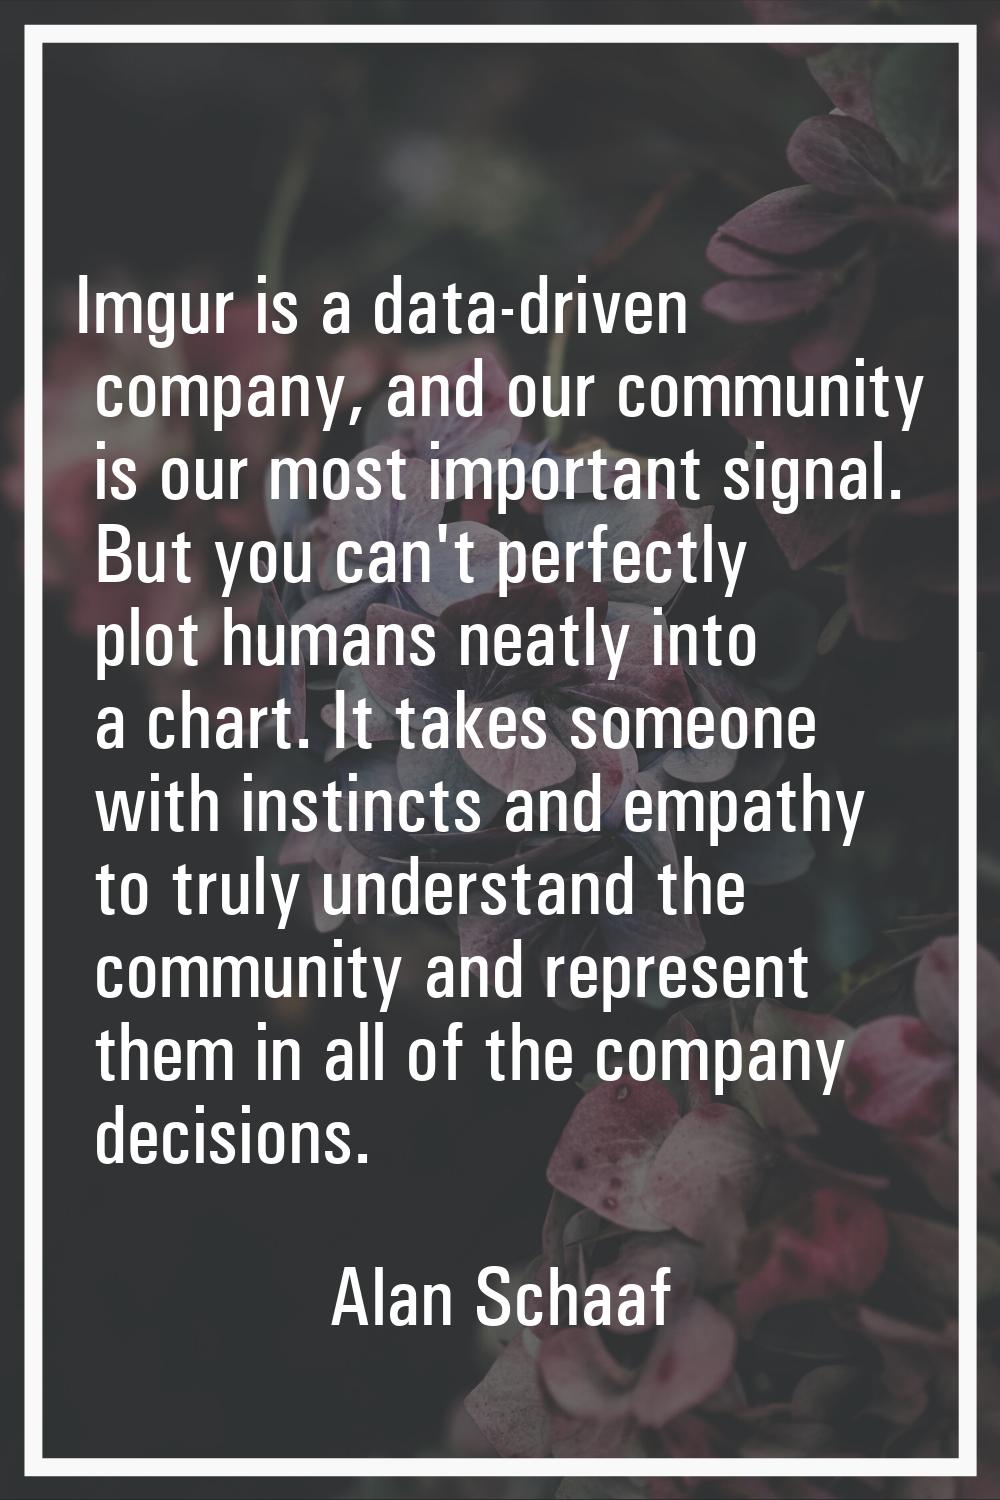 Imgur is a data-driven company, and our community is our most important signal. But you can't perfe